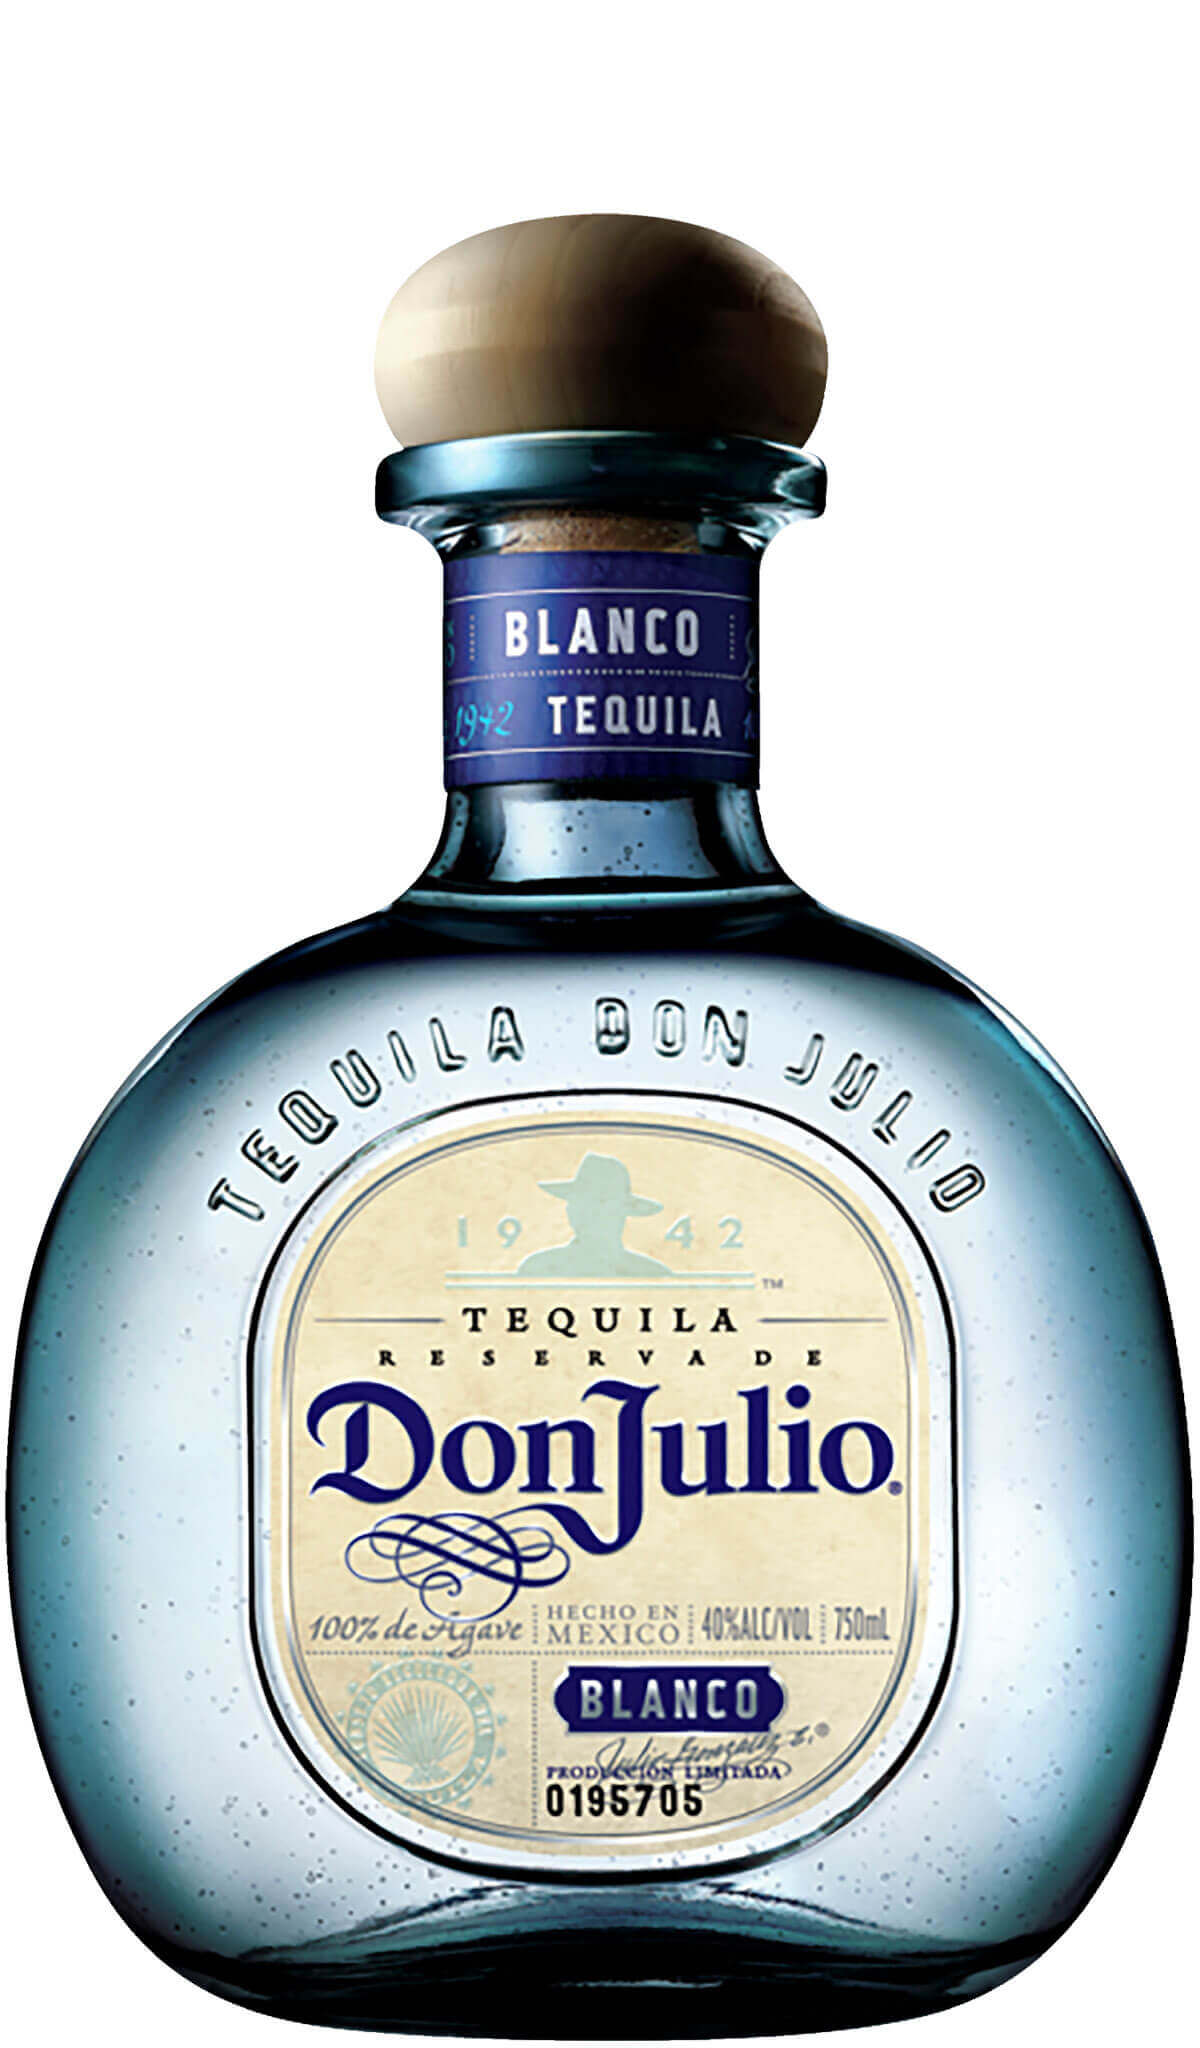 Find out more, explore the range and buy Don Julio Blanco Tequila 750ml available online at Wine Sellers Direct - Australia's independent liquor specialists.